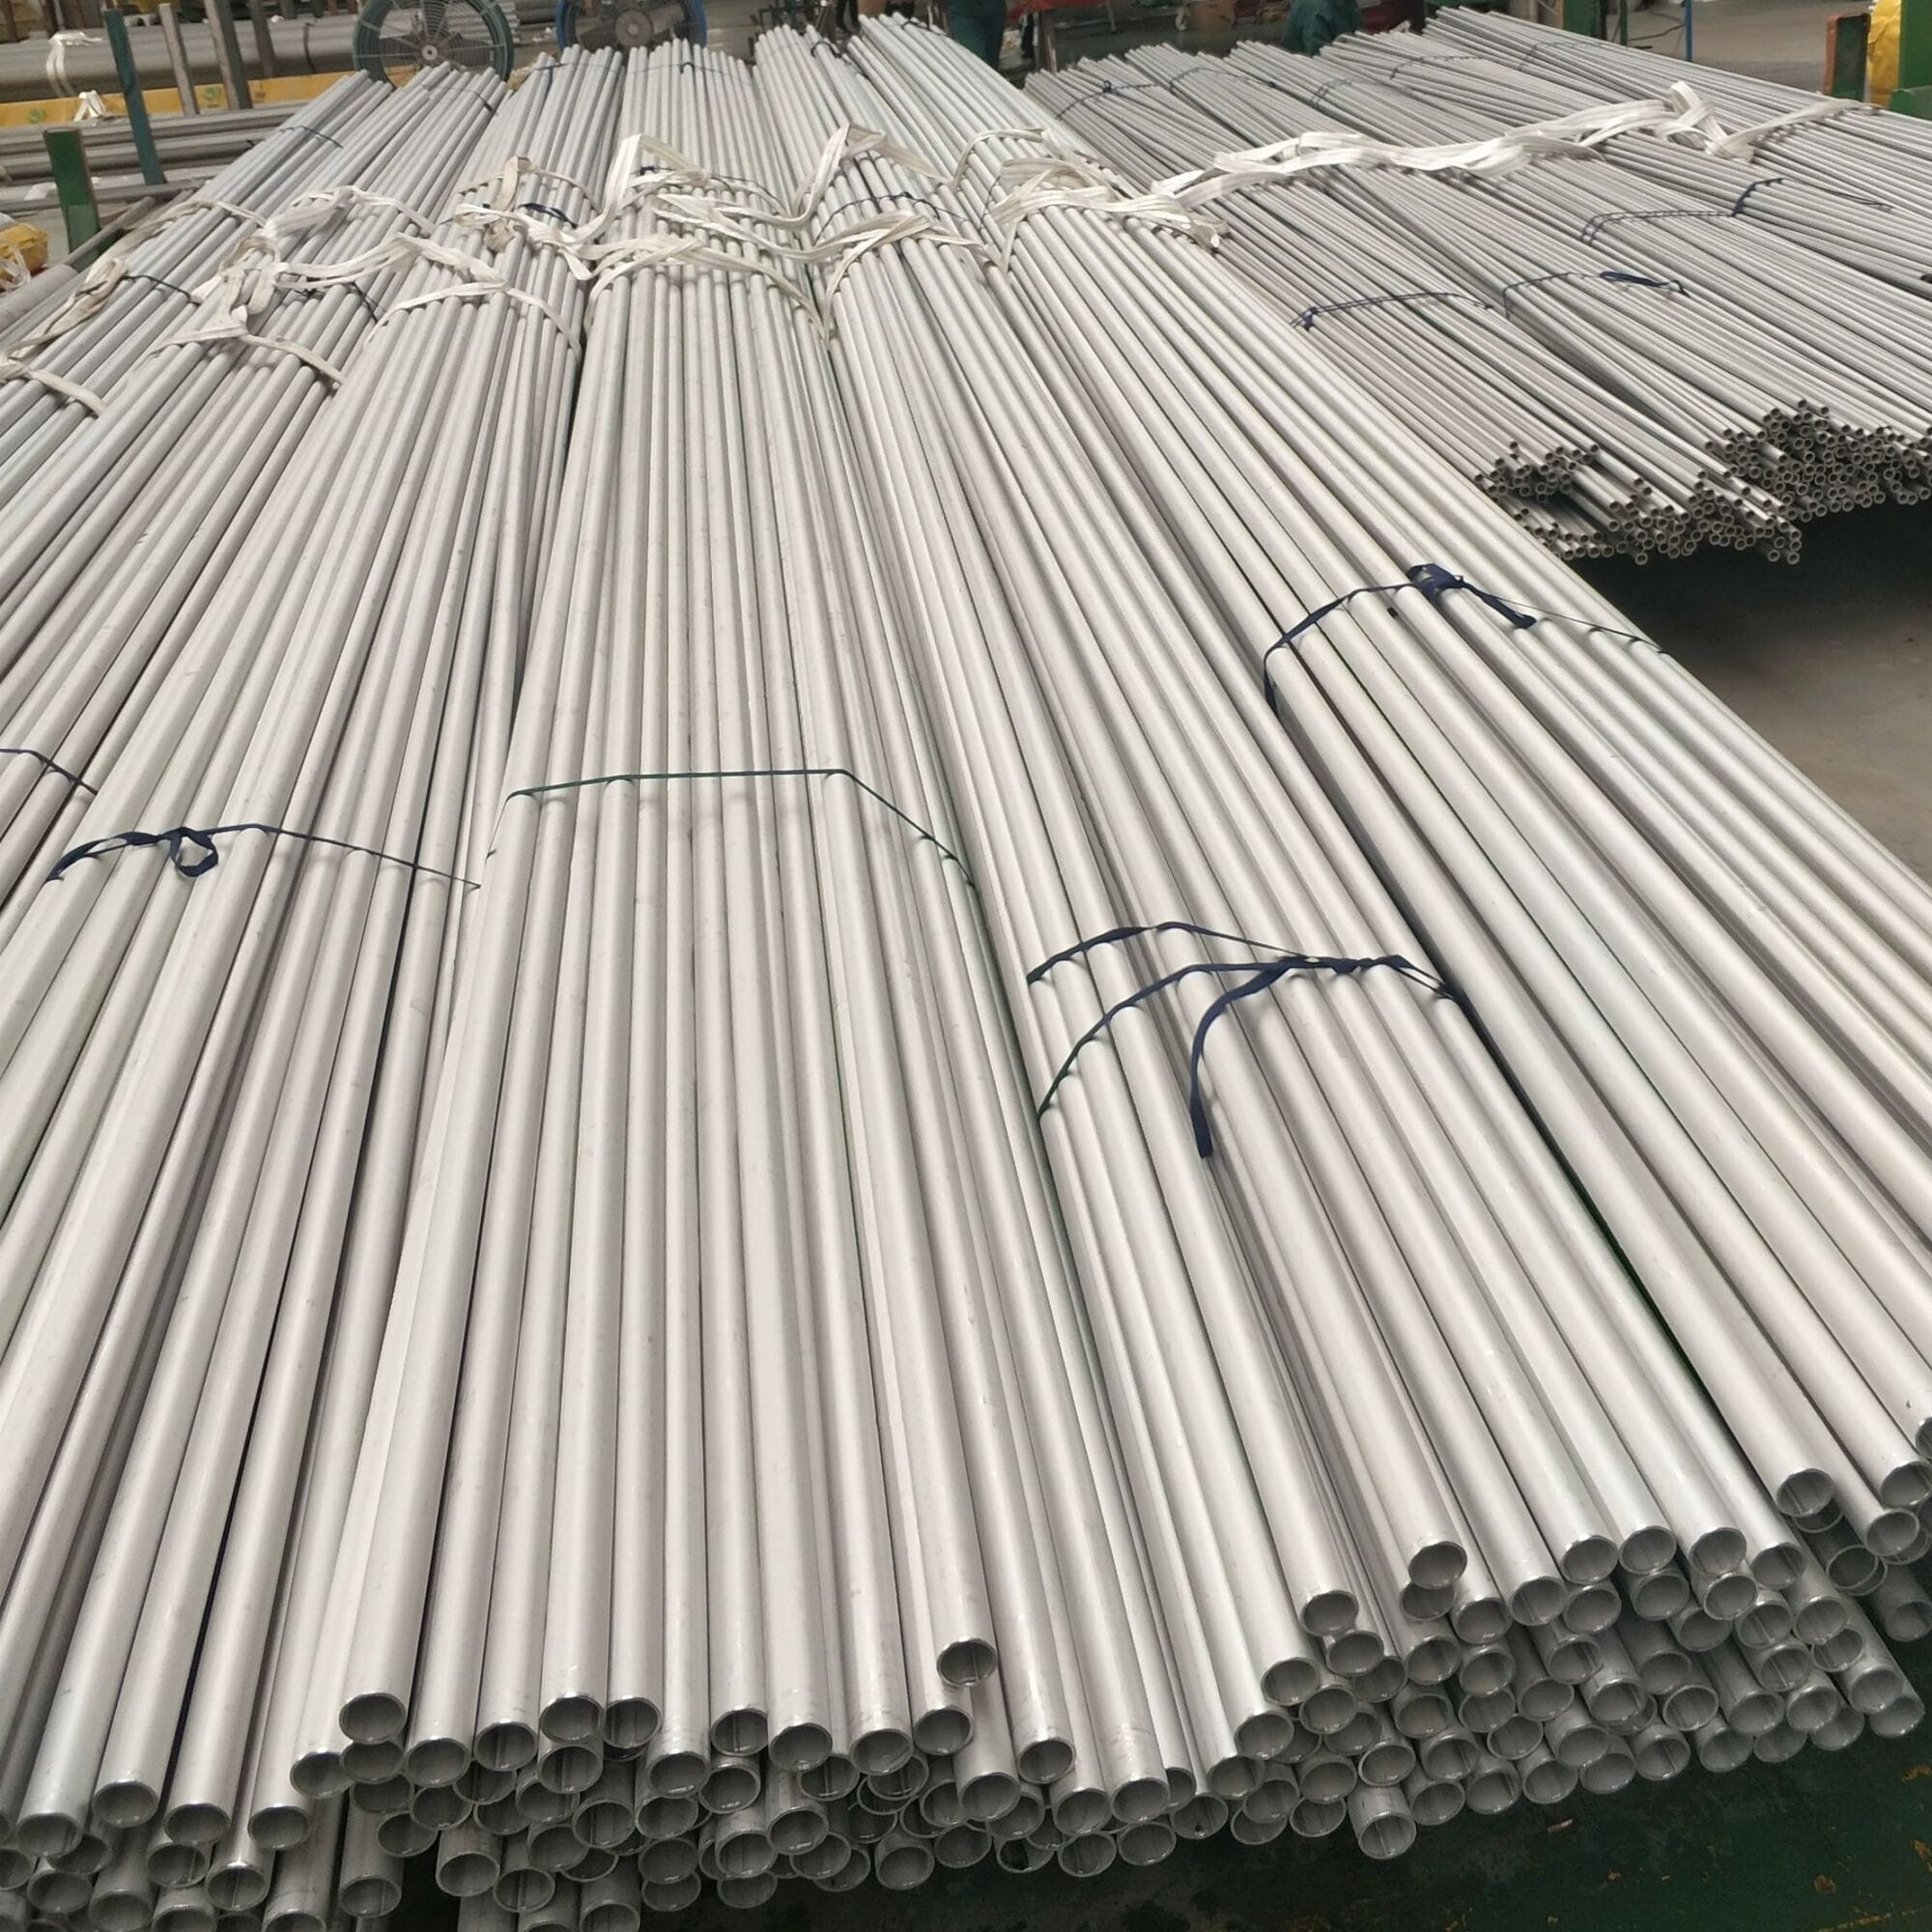 Welding Technology for Thin-Walled Stainless Steel Pipes